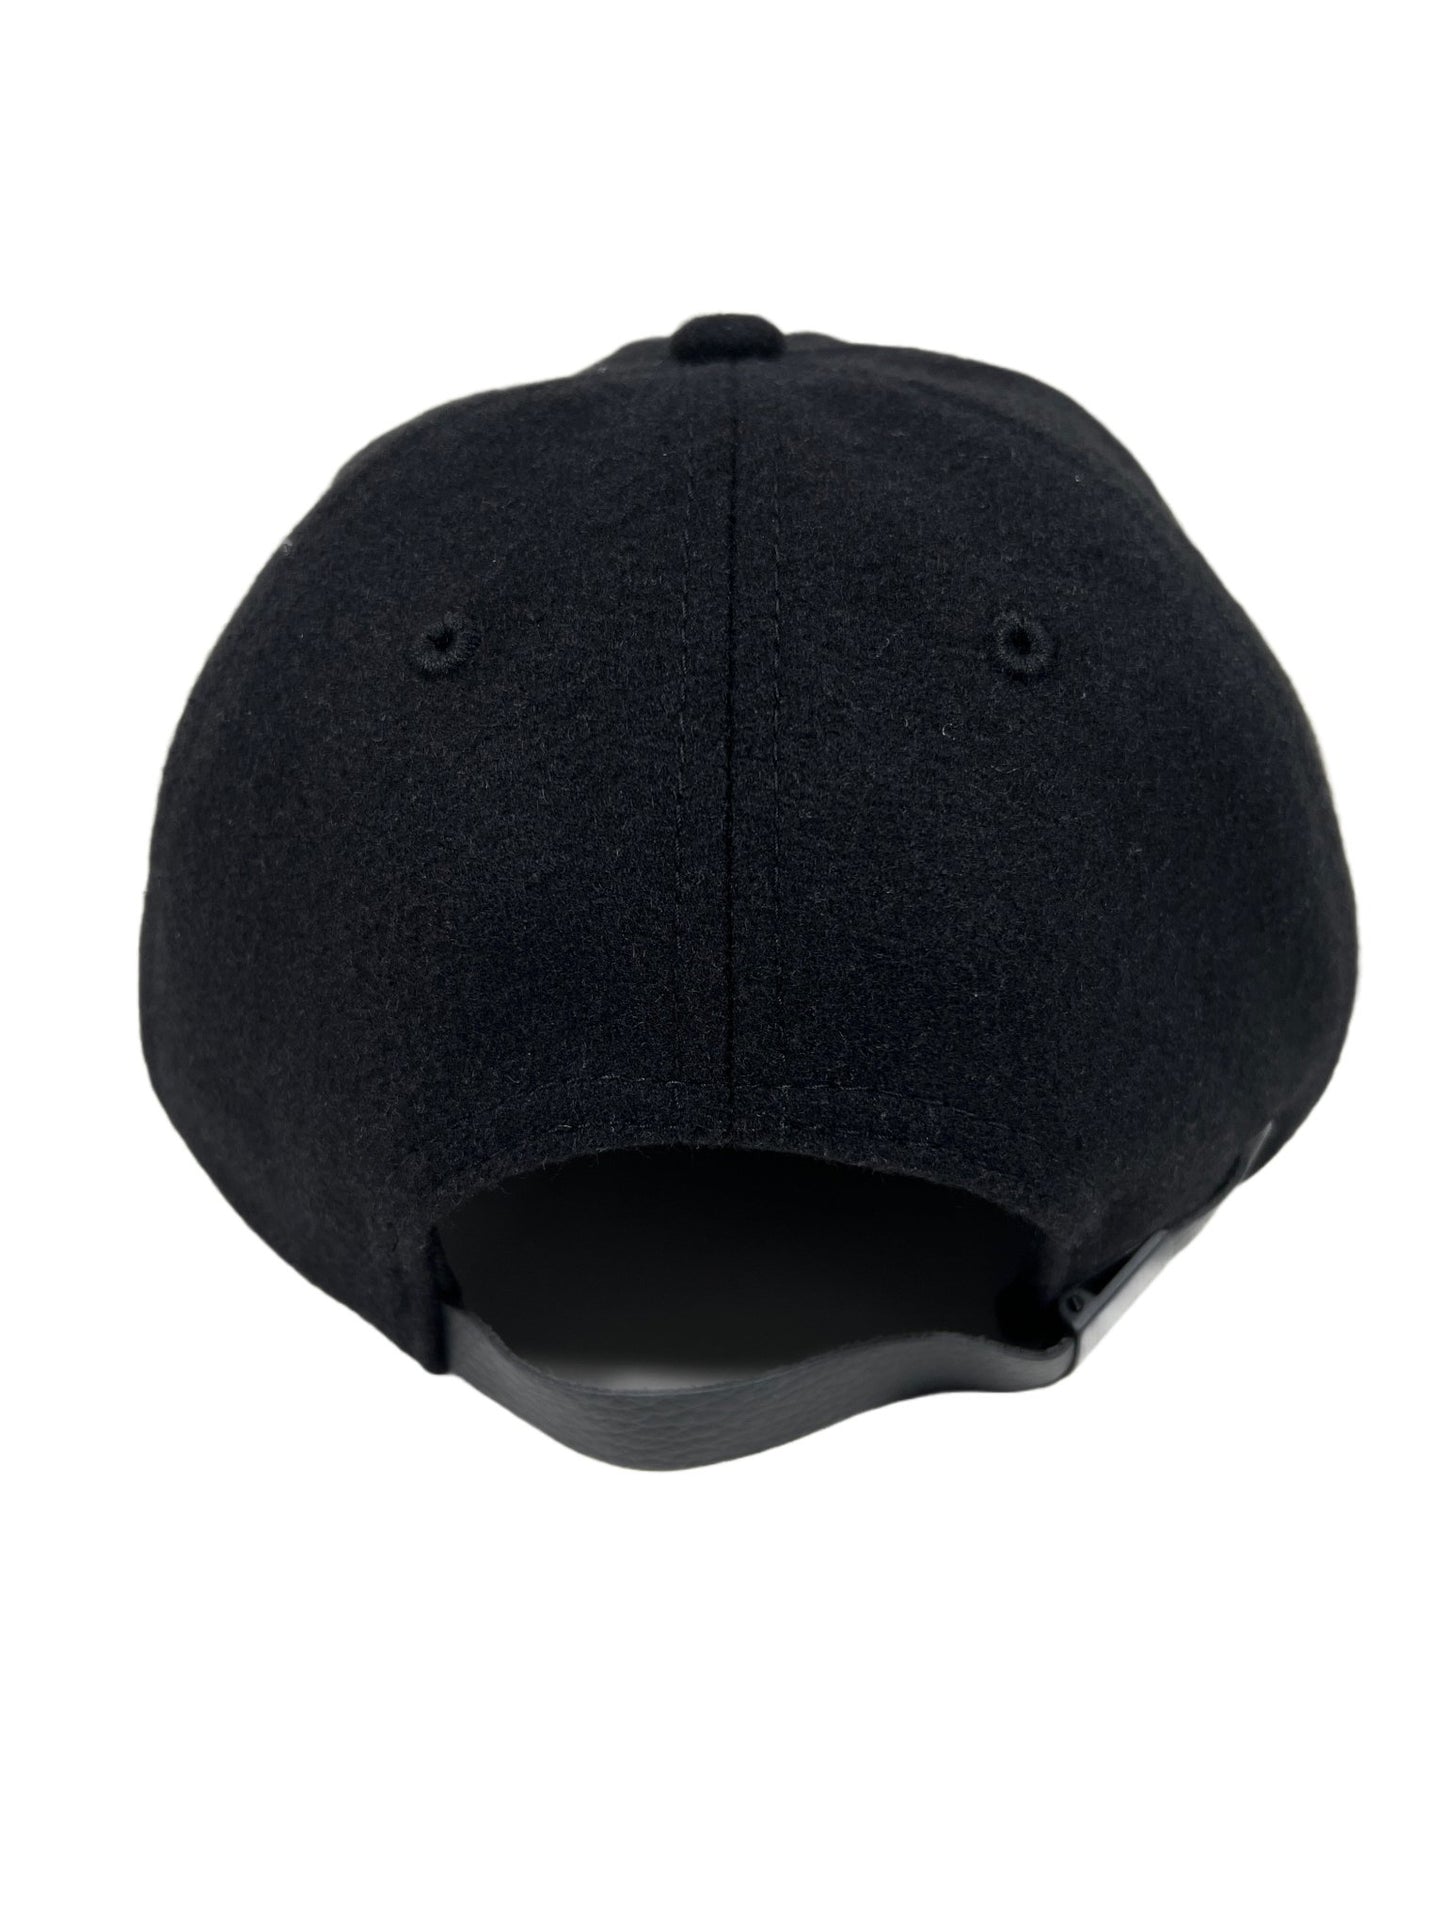 The back view of a black wool hat with a PLEASURES logo.